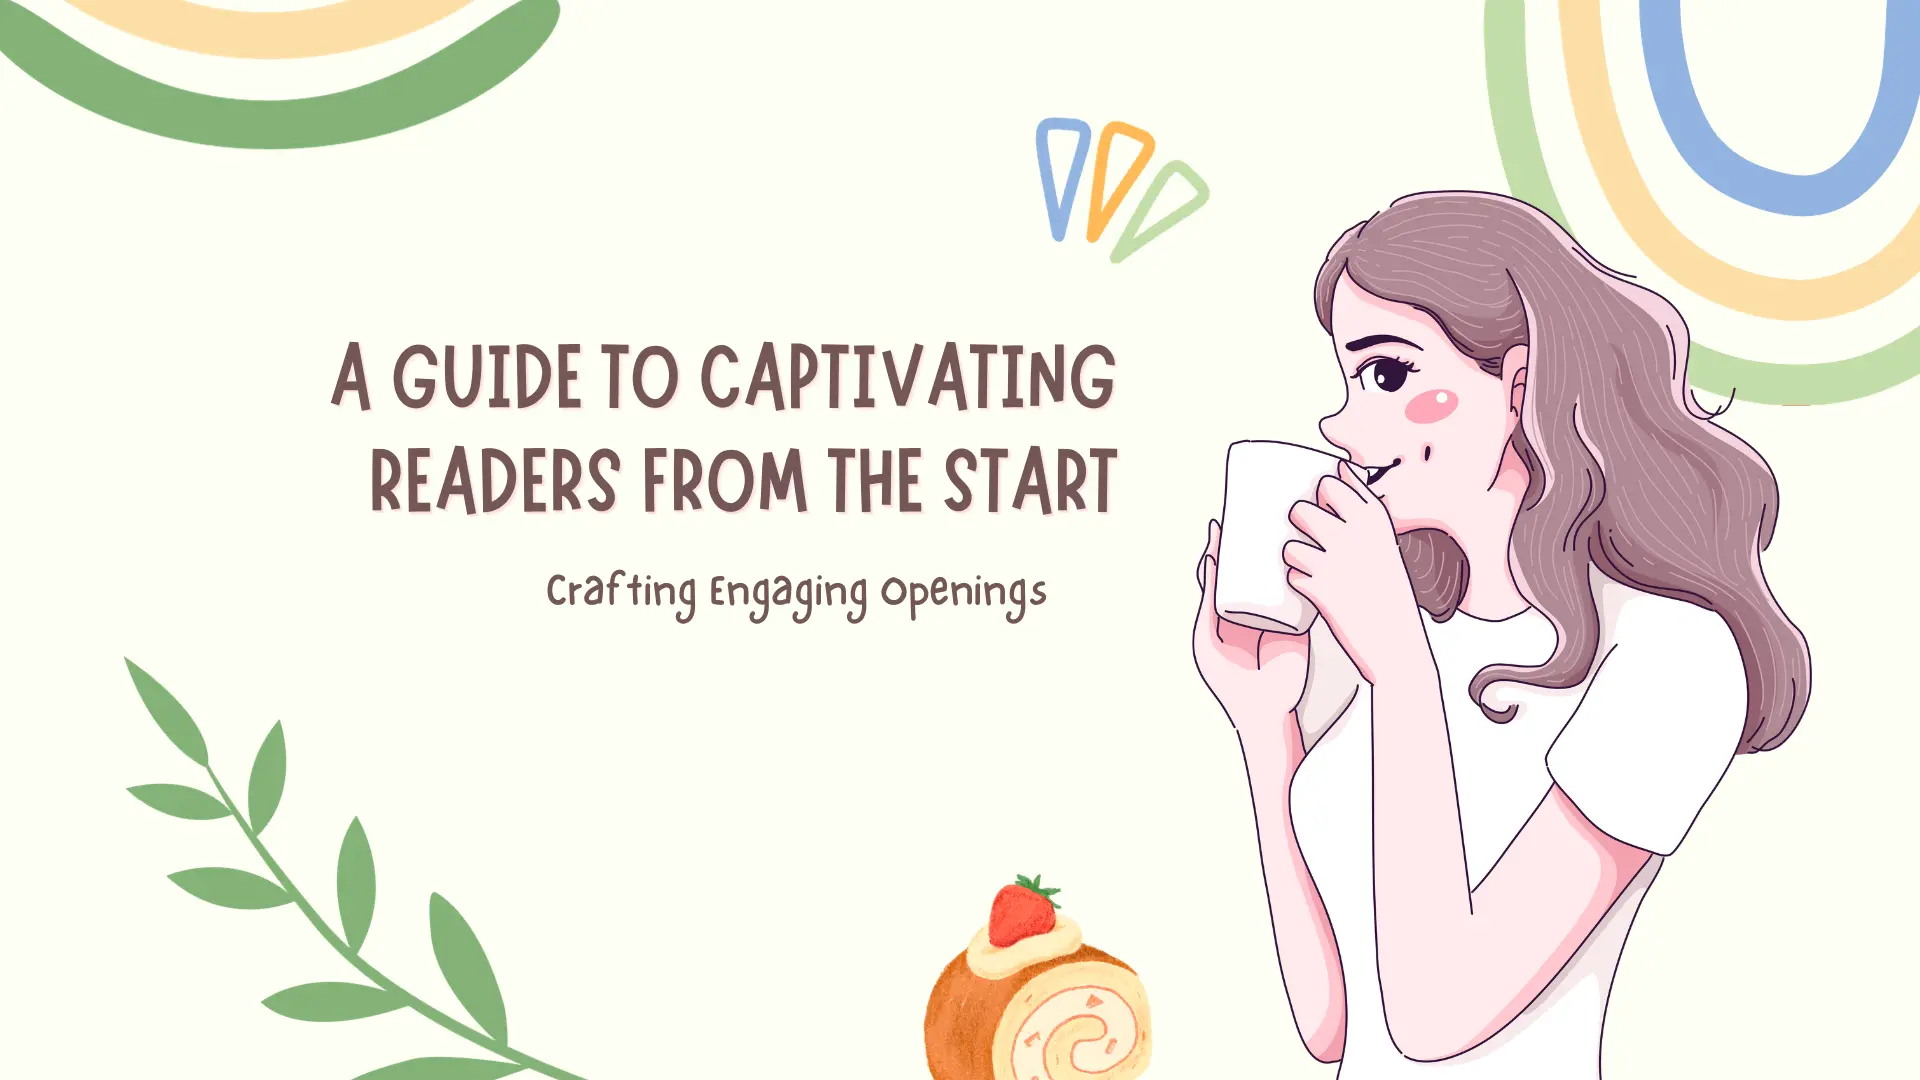 Crafting Engaging Openings: A Guide to Captivating Readers from the Start